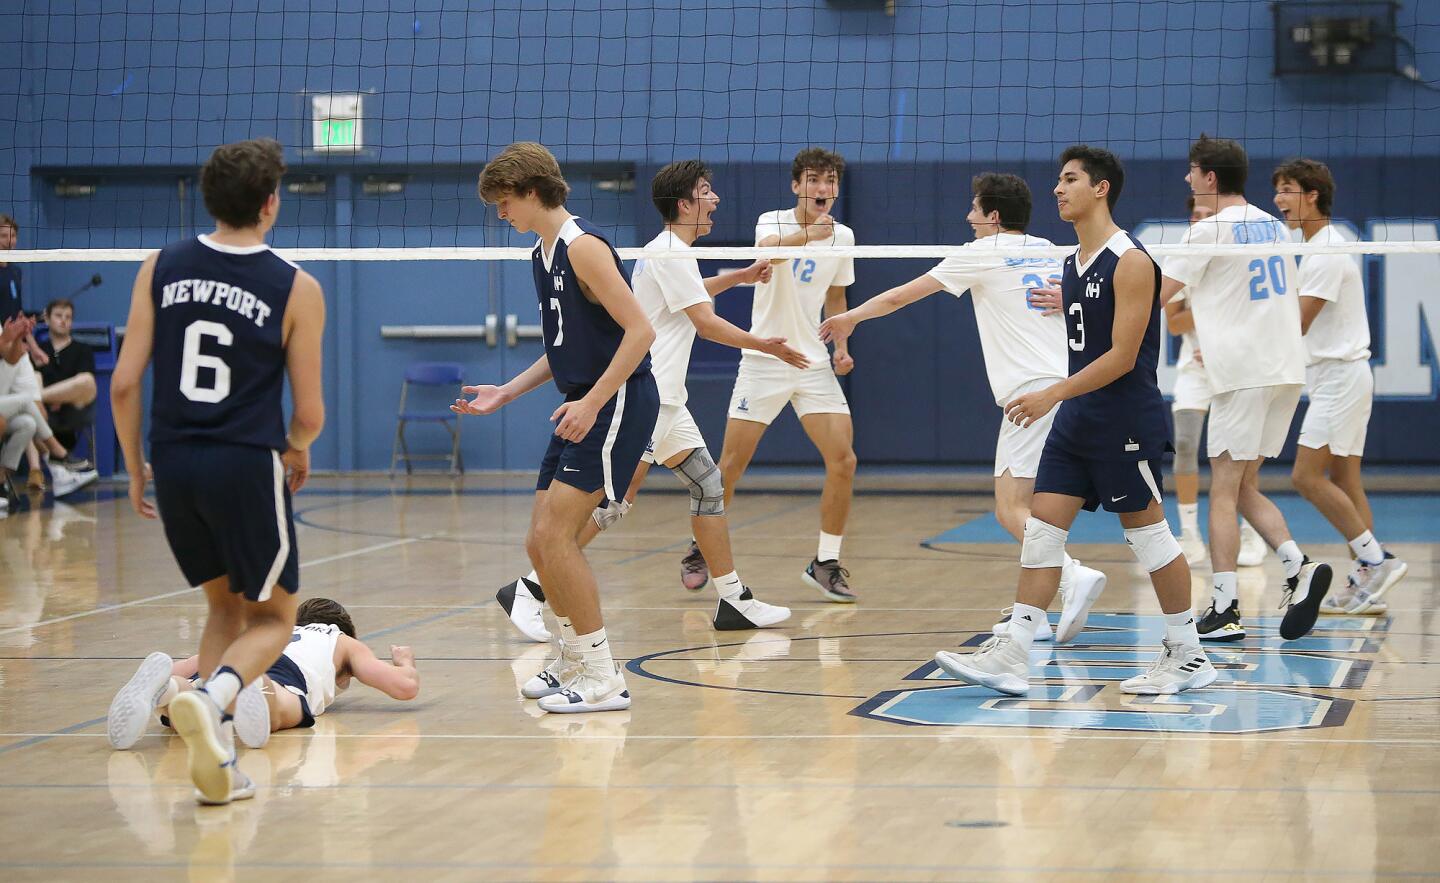 Corona del Mar, in white, celebrate winning a tough point during second round of the Battle of the Bay boys' volleyball match against Newport Harbor in Surf League play on Wednesday.